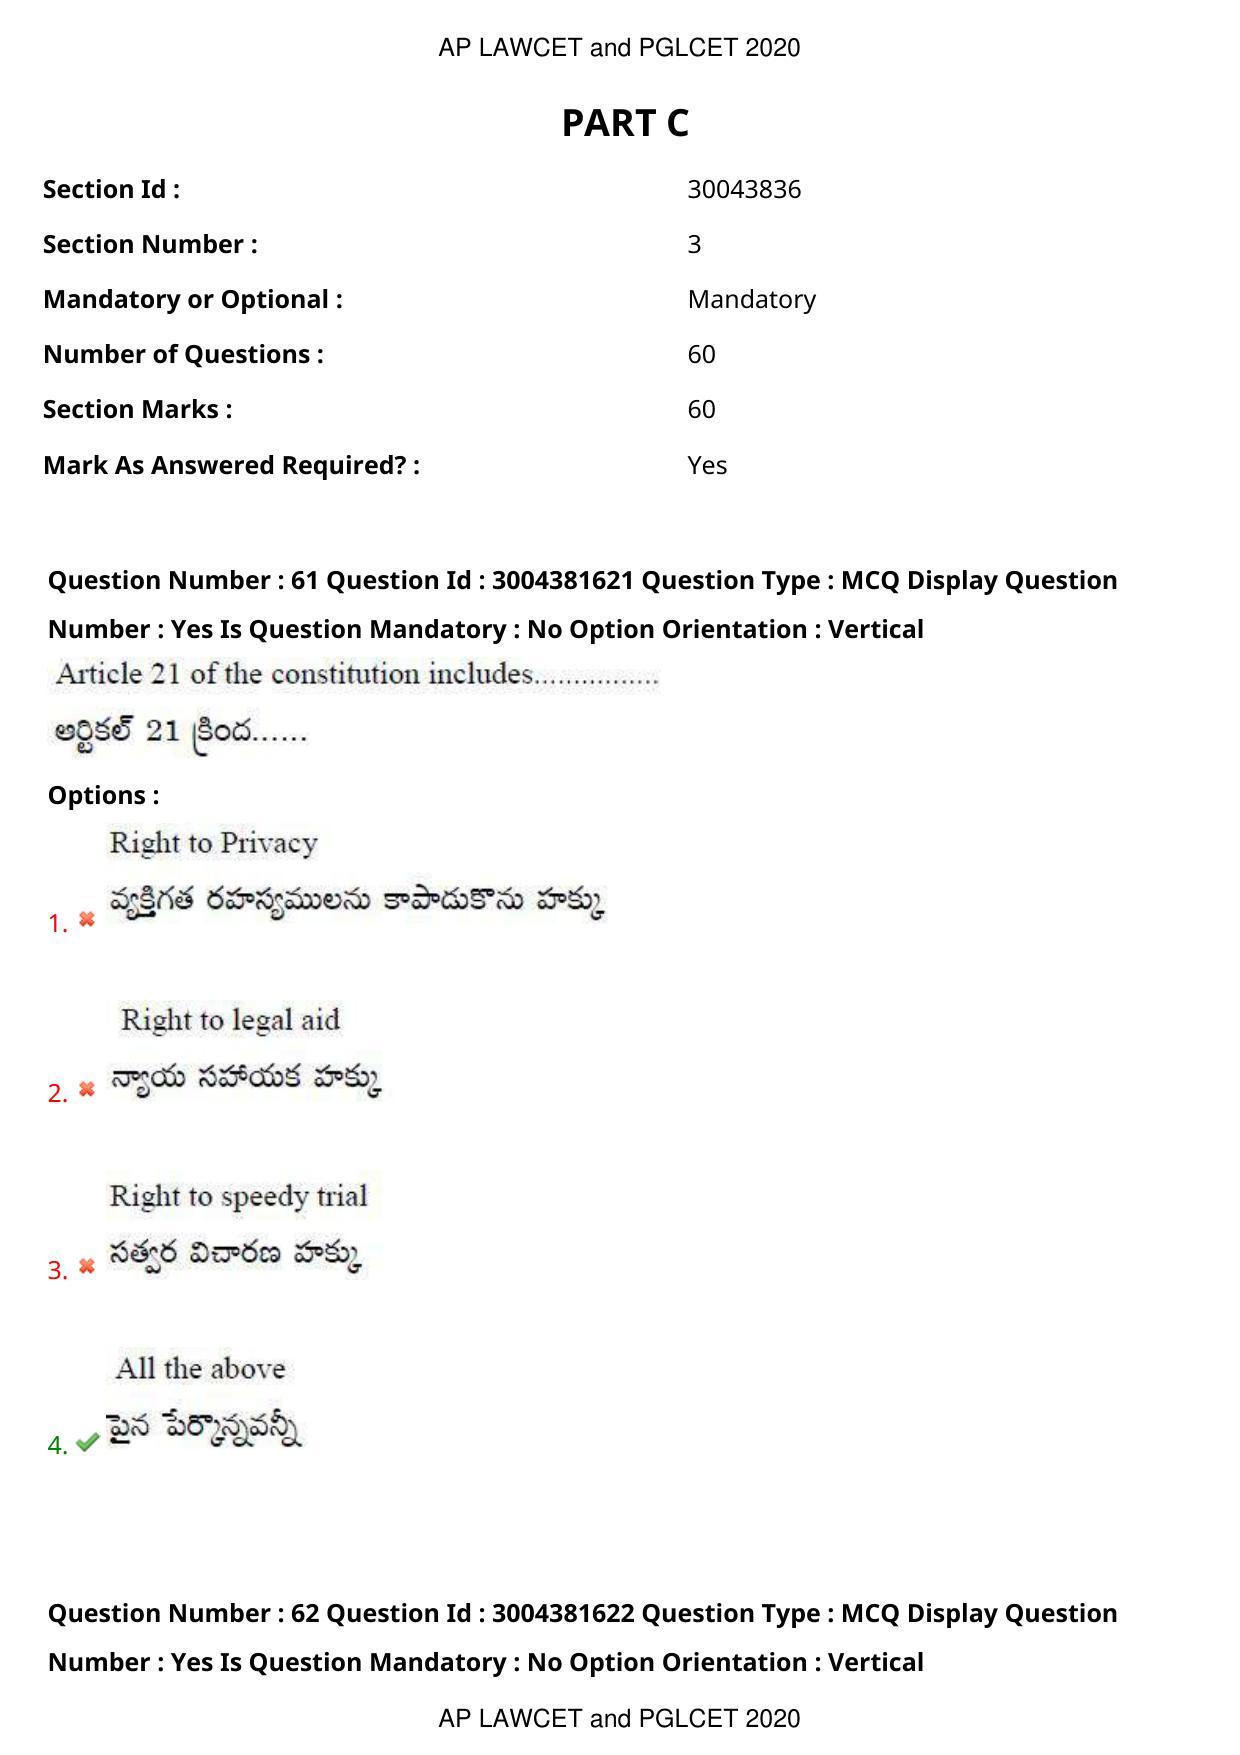 AP LAWCET 2020 - 5 Year LLB Question Paper With Keys - Page 40